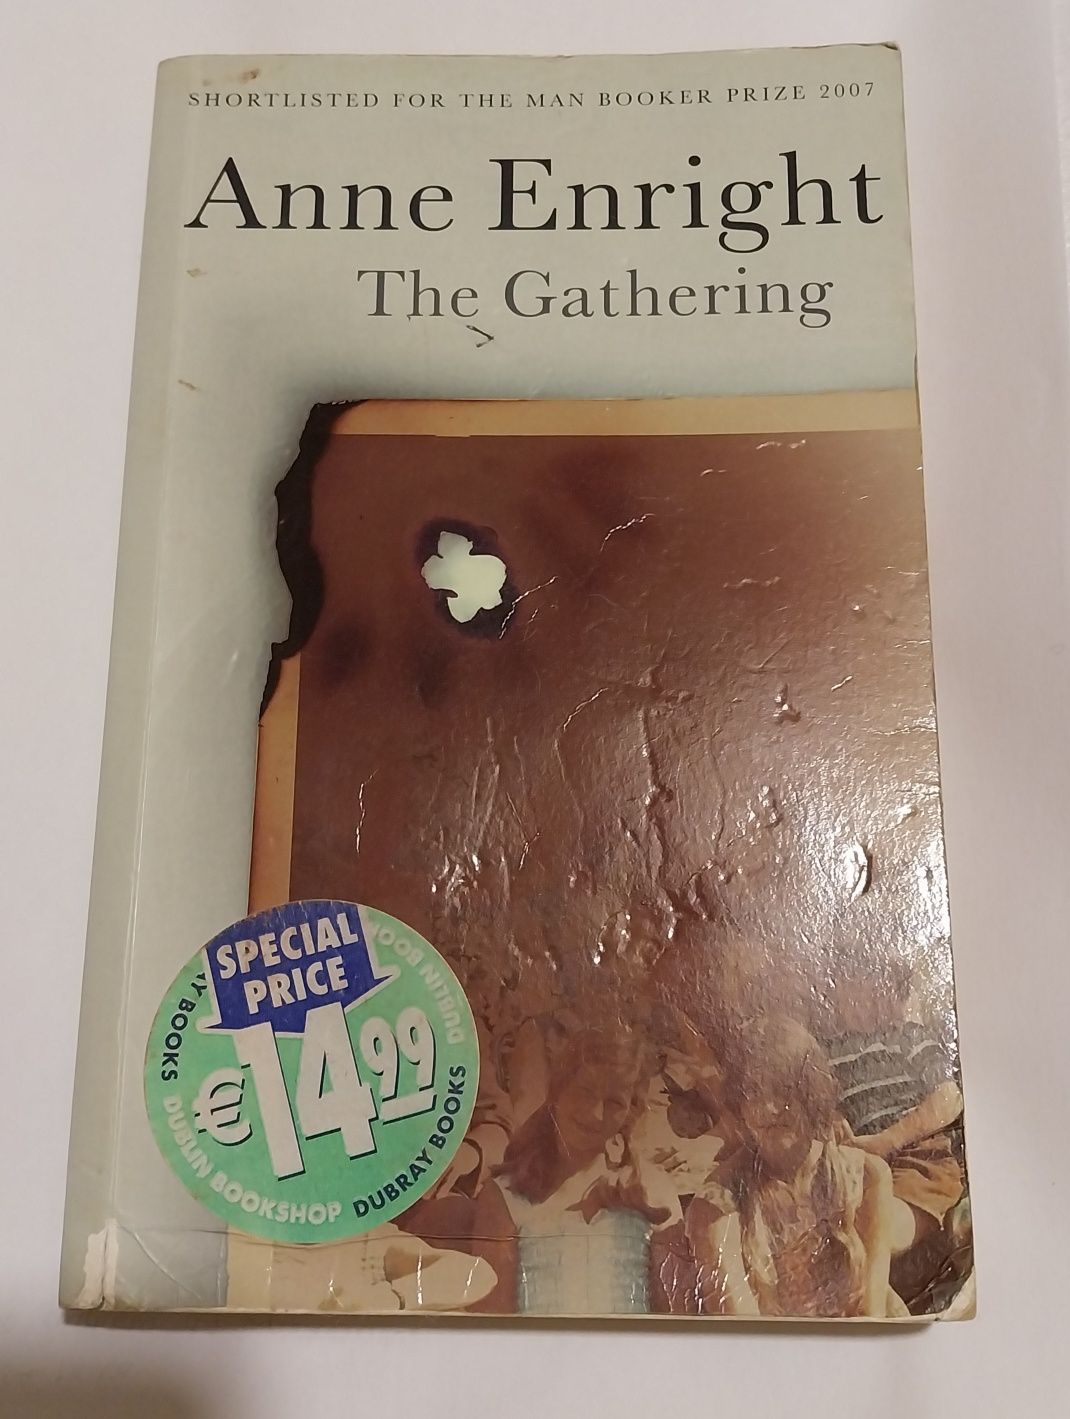 "The Gathering", by Anne Enright